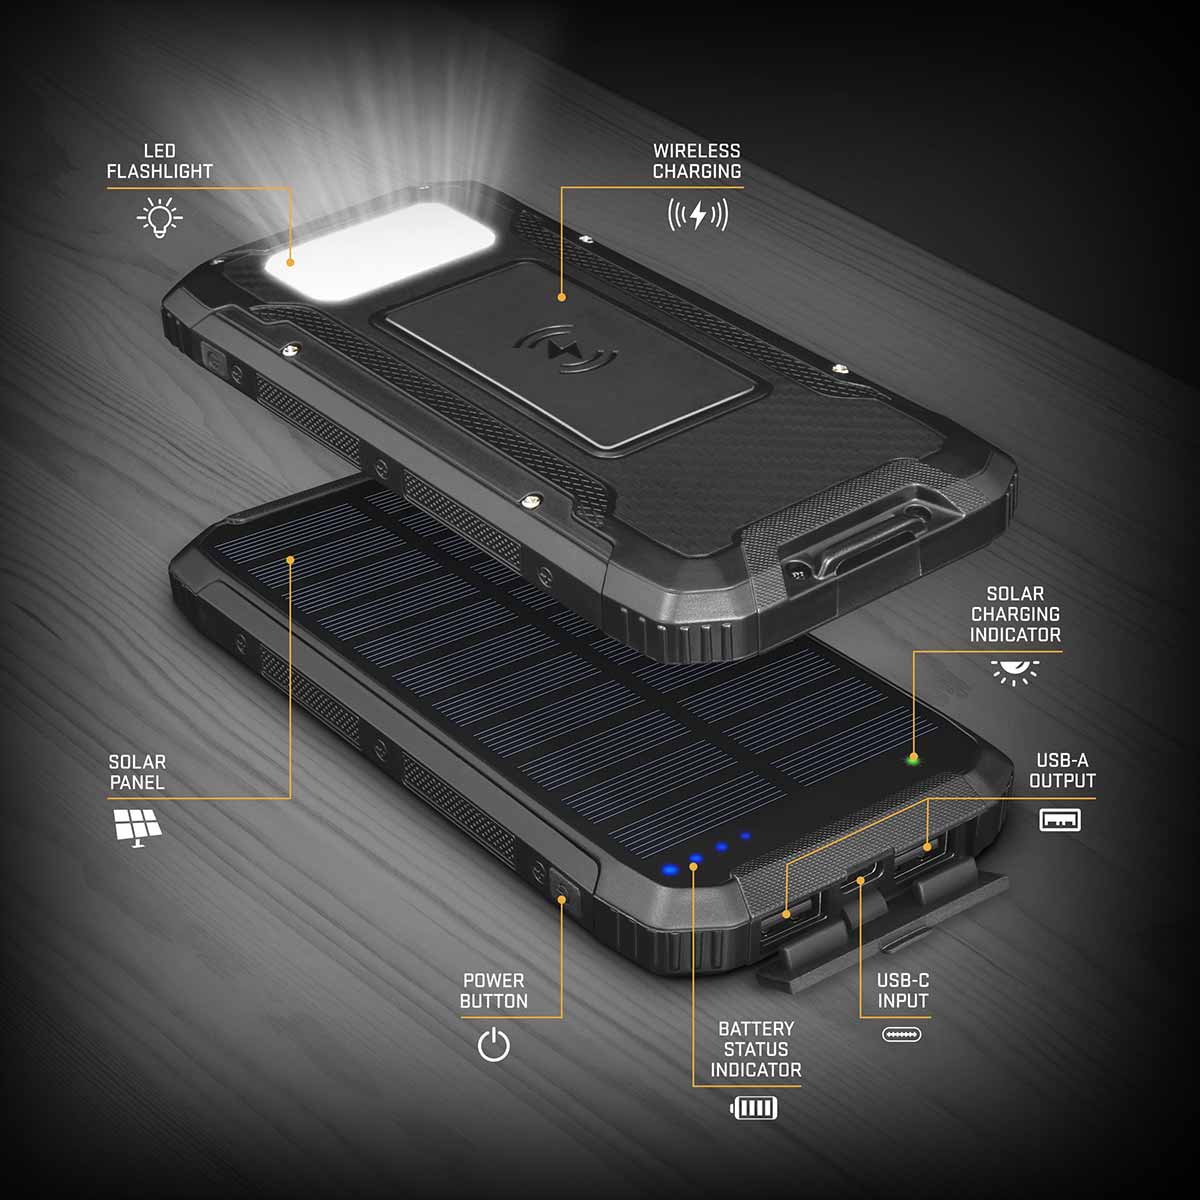 Solar power bank with 10,000 mAh capacity and many features